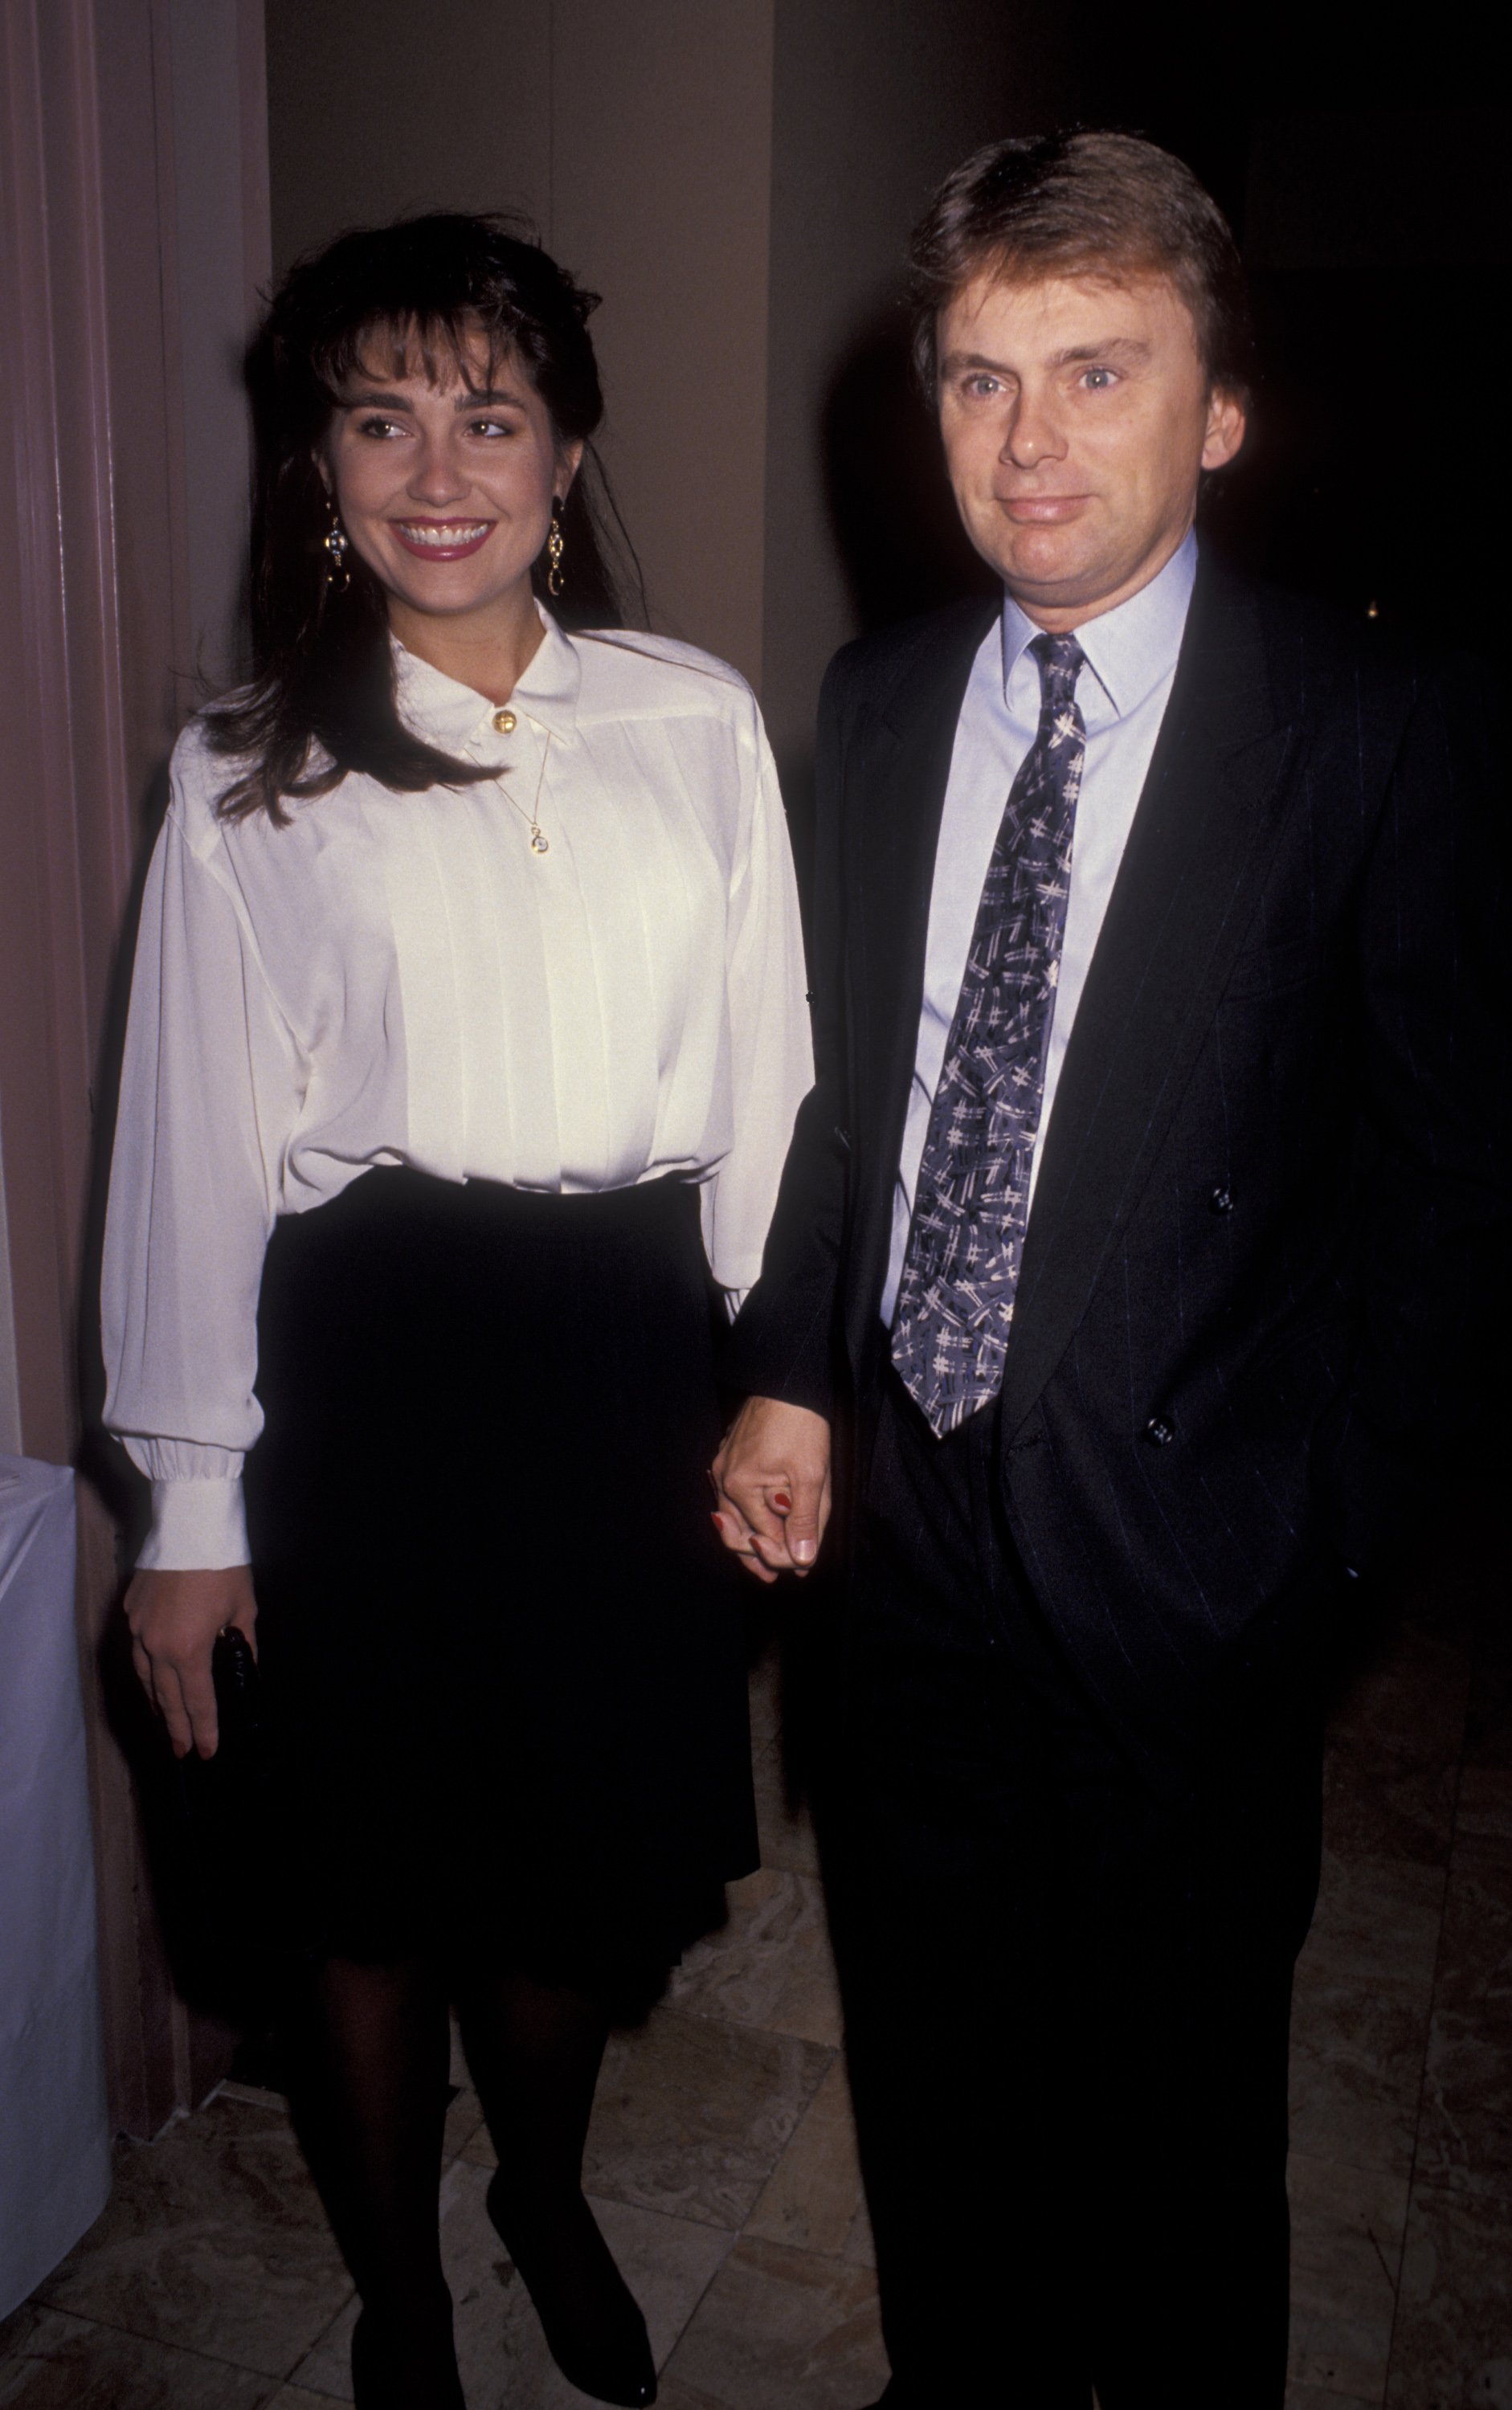 Lesly Brown and Pat Sajak at the "Toys for Tots Benefit" on December 12, 1990, in Beverly Hills, California. | Source: Getty Images